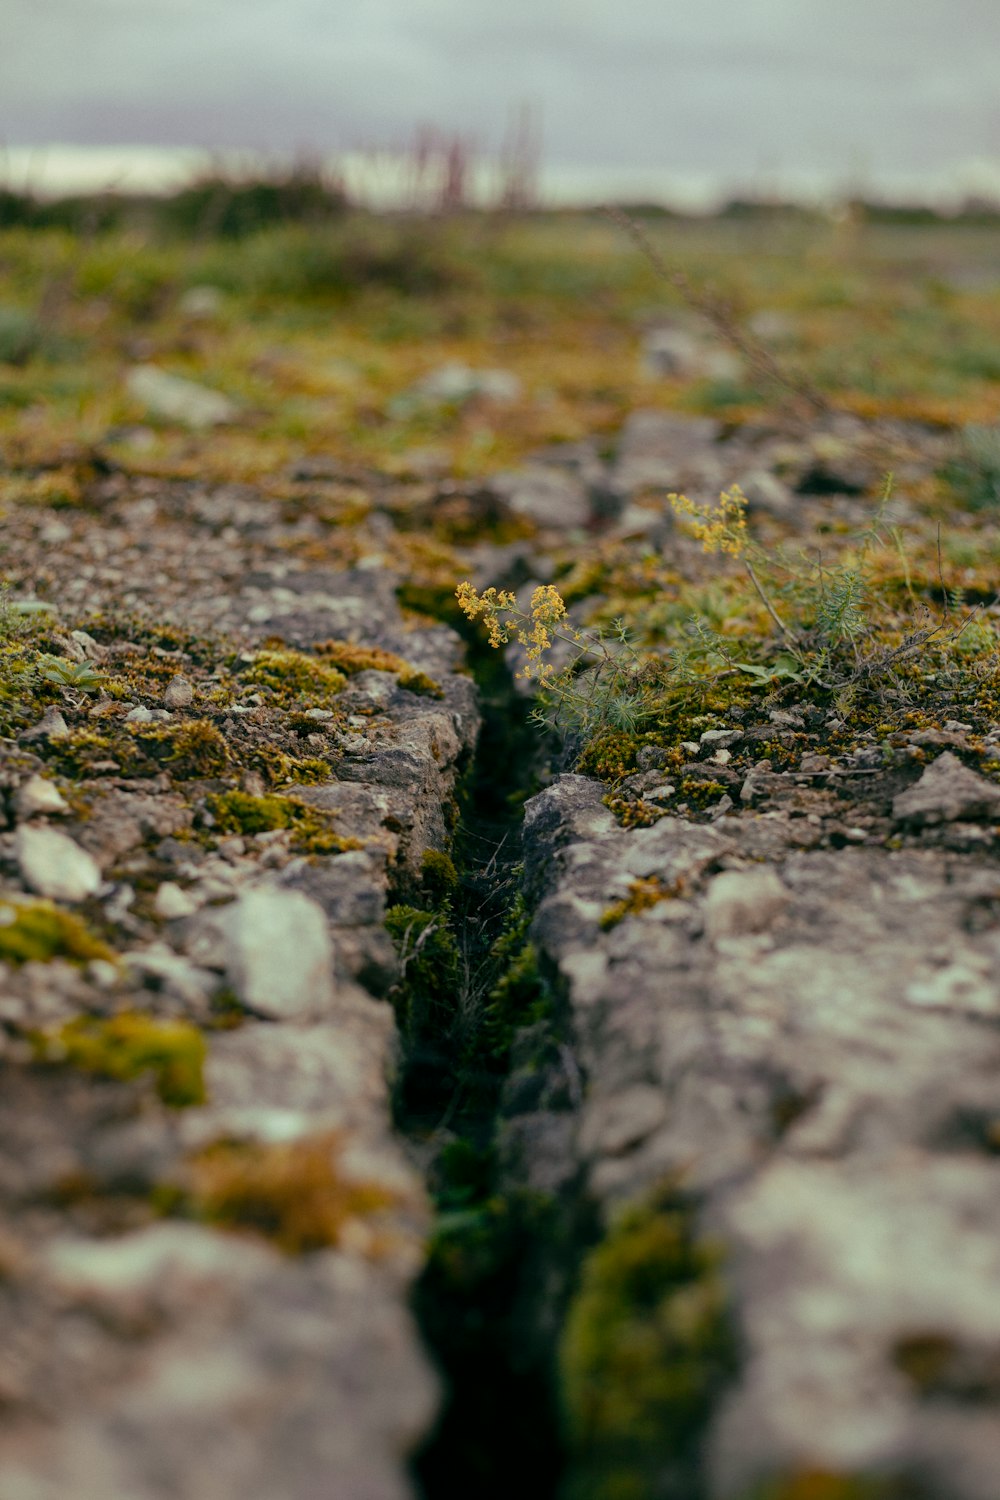 a close up of a crack in the ground